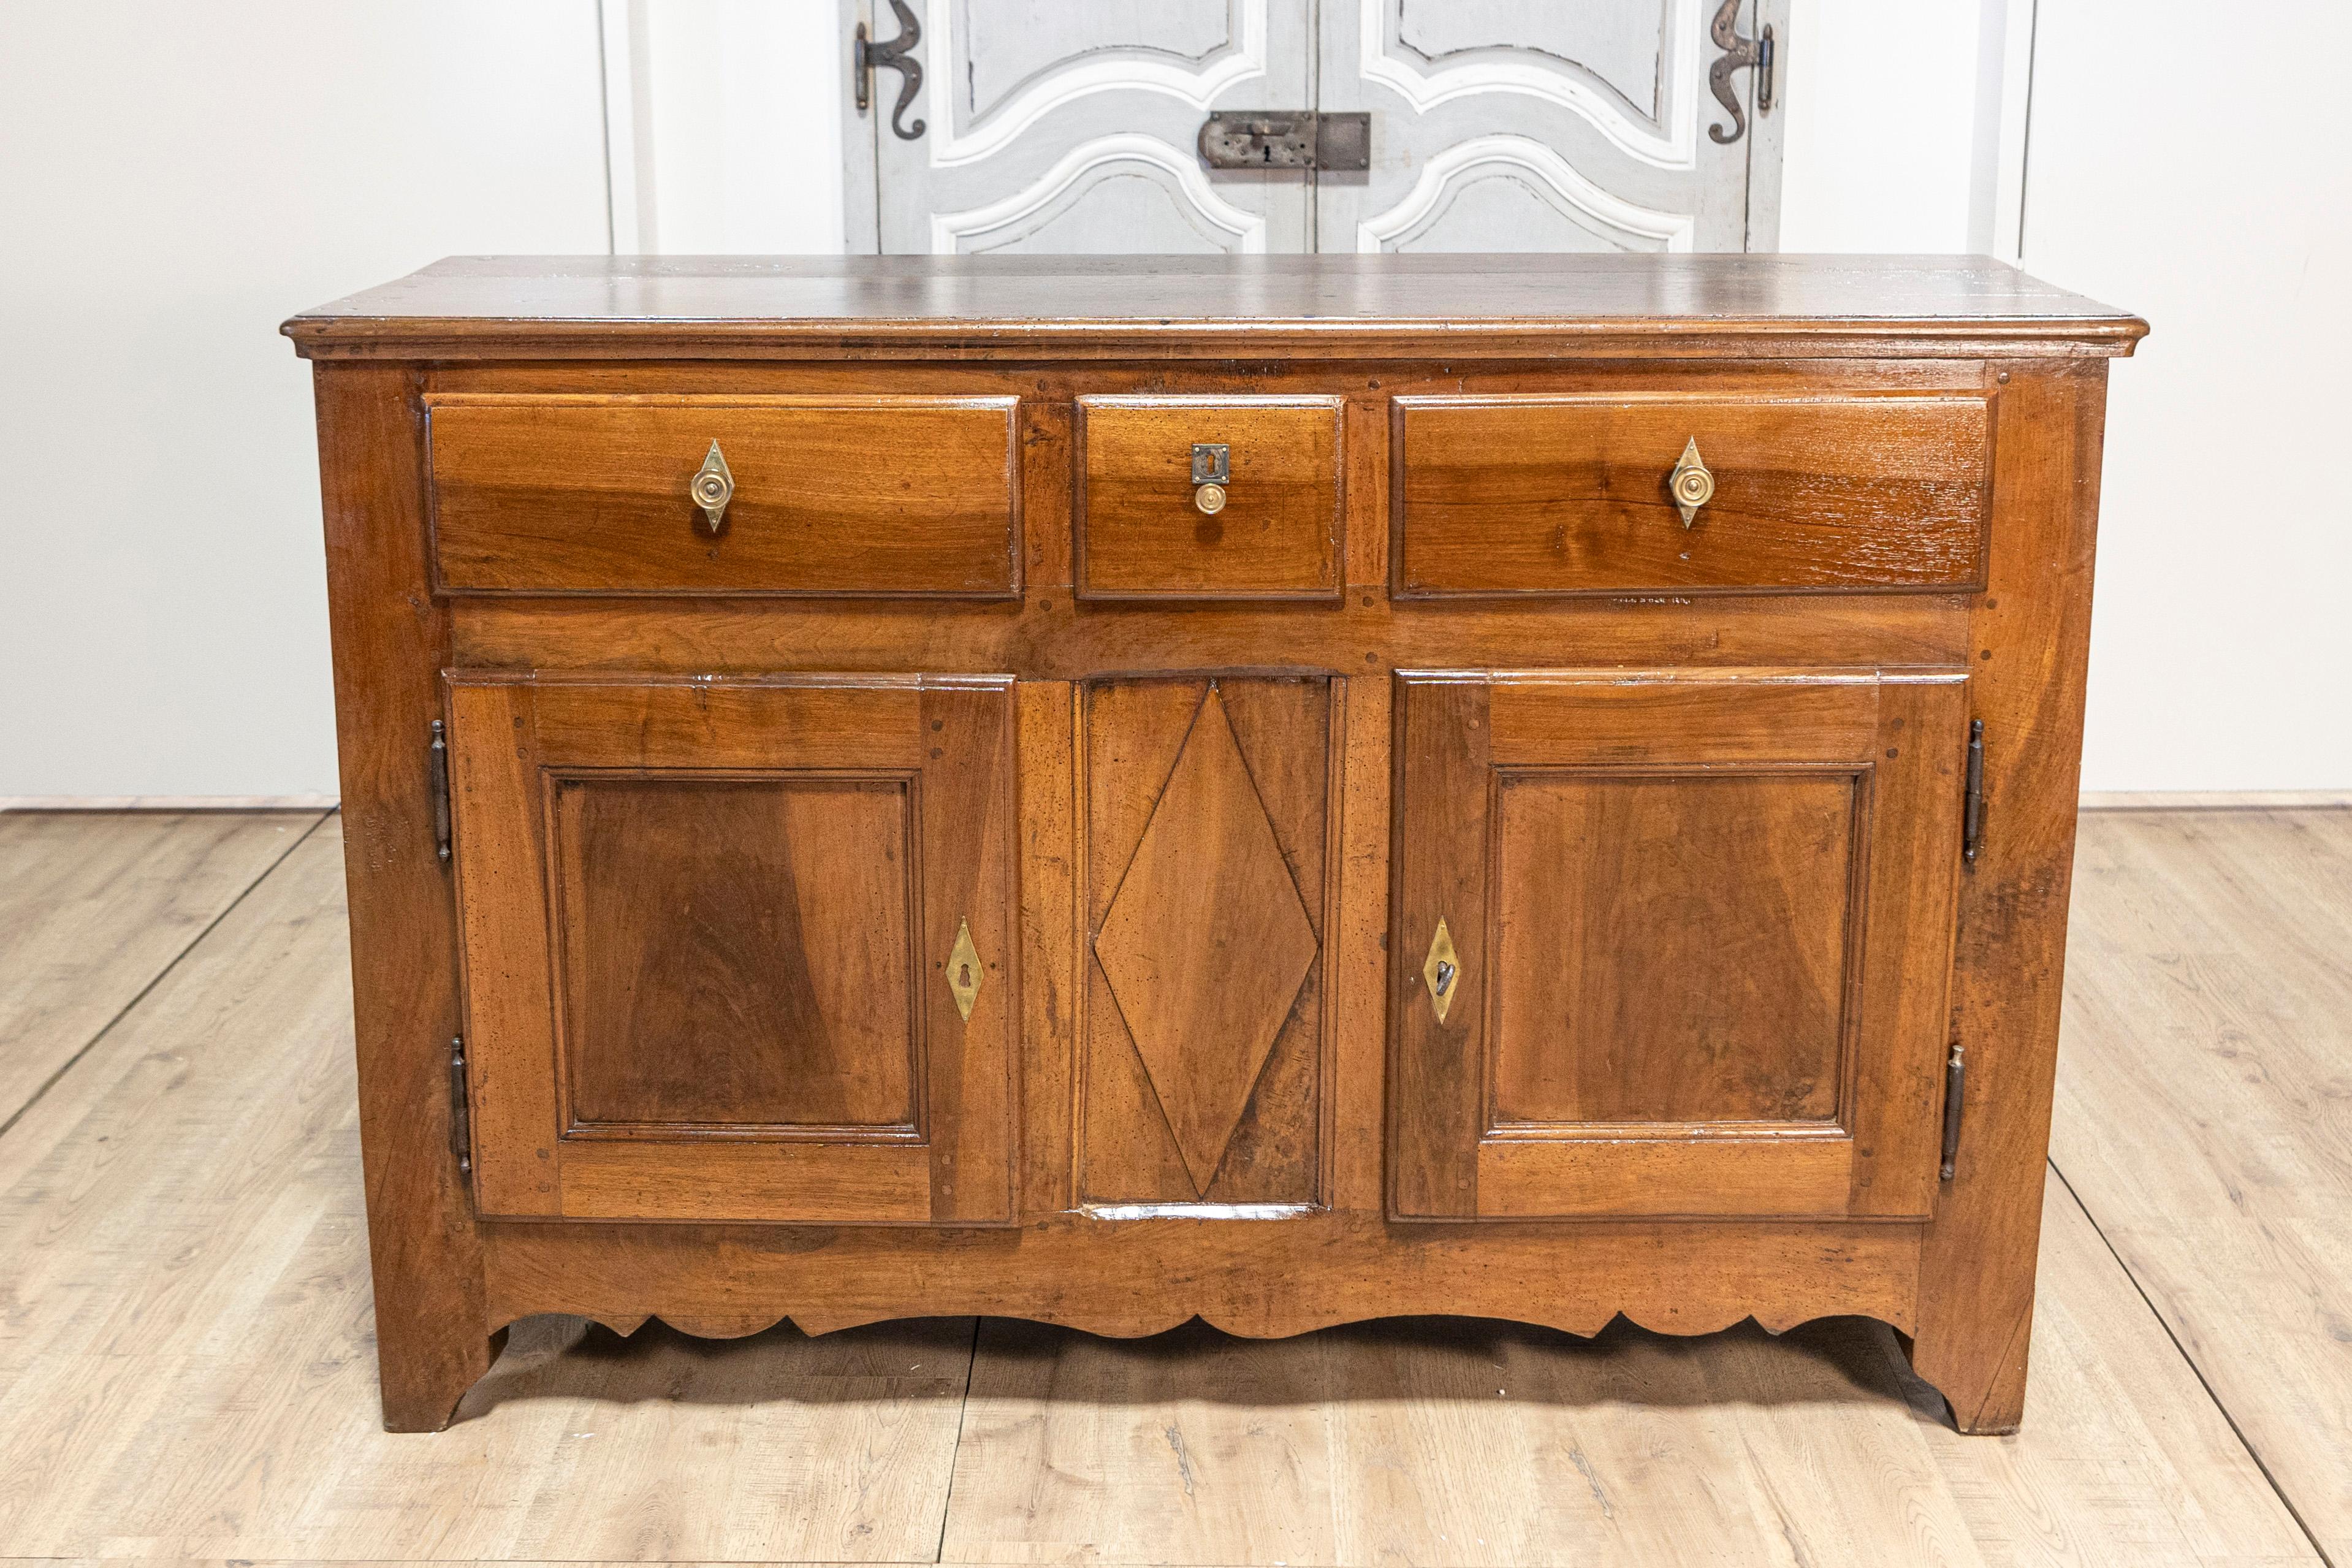 An Italian walnut buffet from the early 19th century, with three drawers over two doors, carved diamond motif and scalloped apron. This exquisite Italian walnut buffet from the early 19th century showcases timeless elegance and meticulous